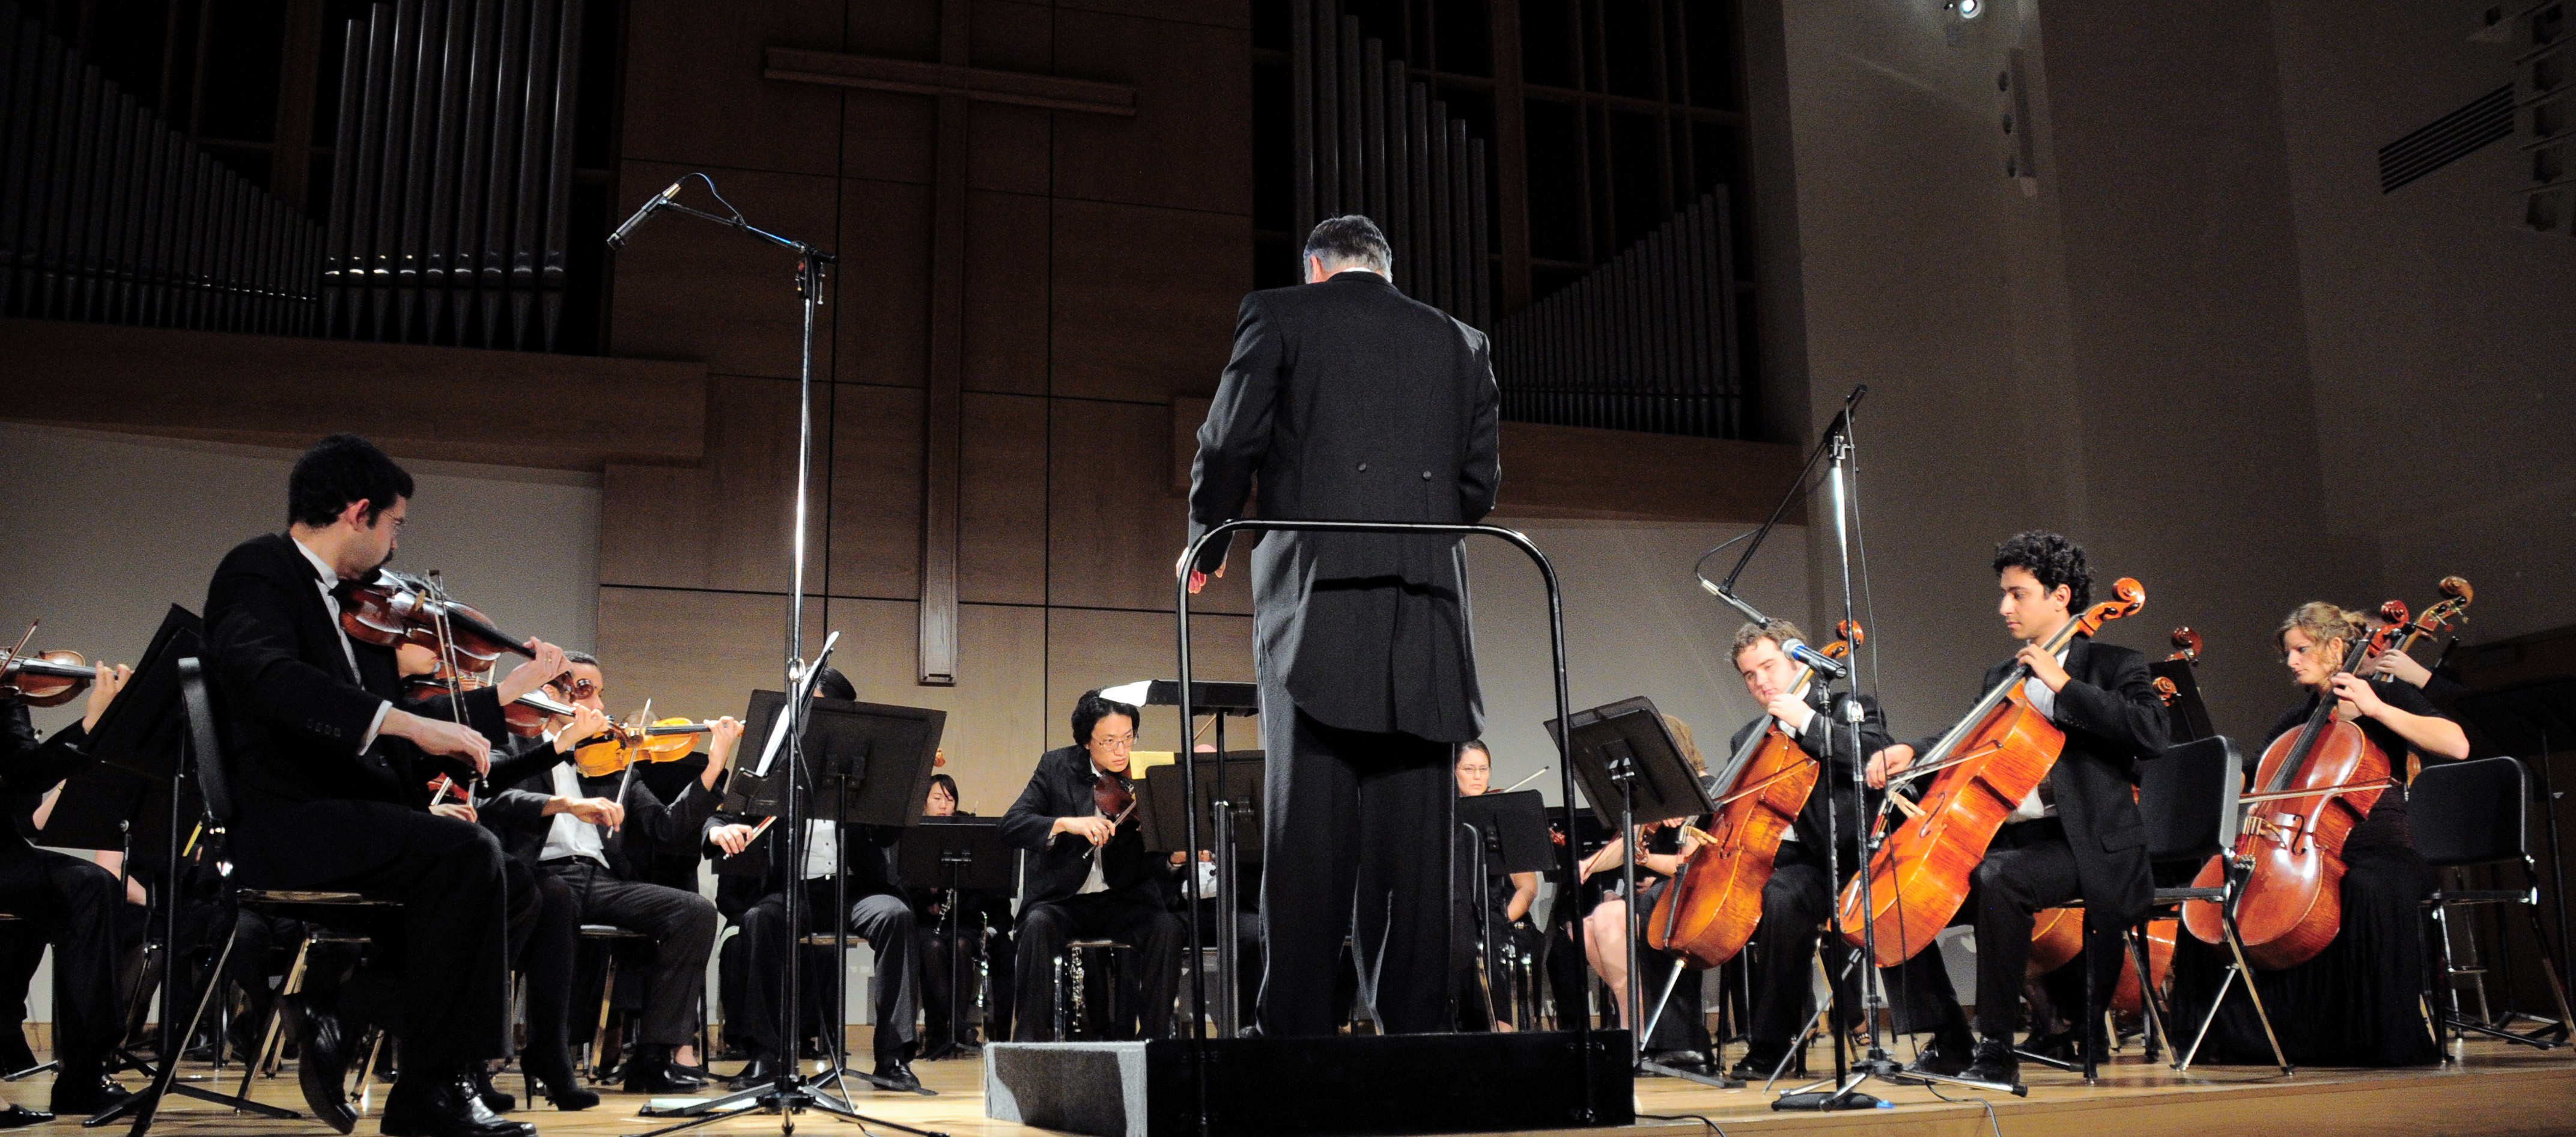 Campbellsville University's Orchestra performs at a recent concert under the direction of Dr. J. Robert Gaddis. (Campbellsville University photo by André Tomaz)